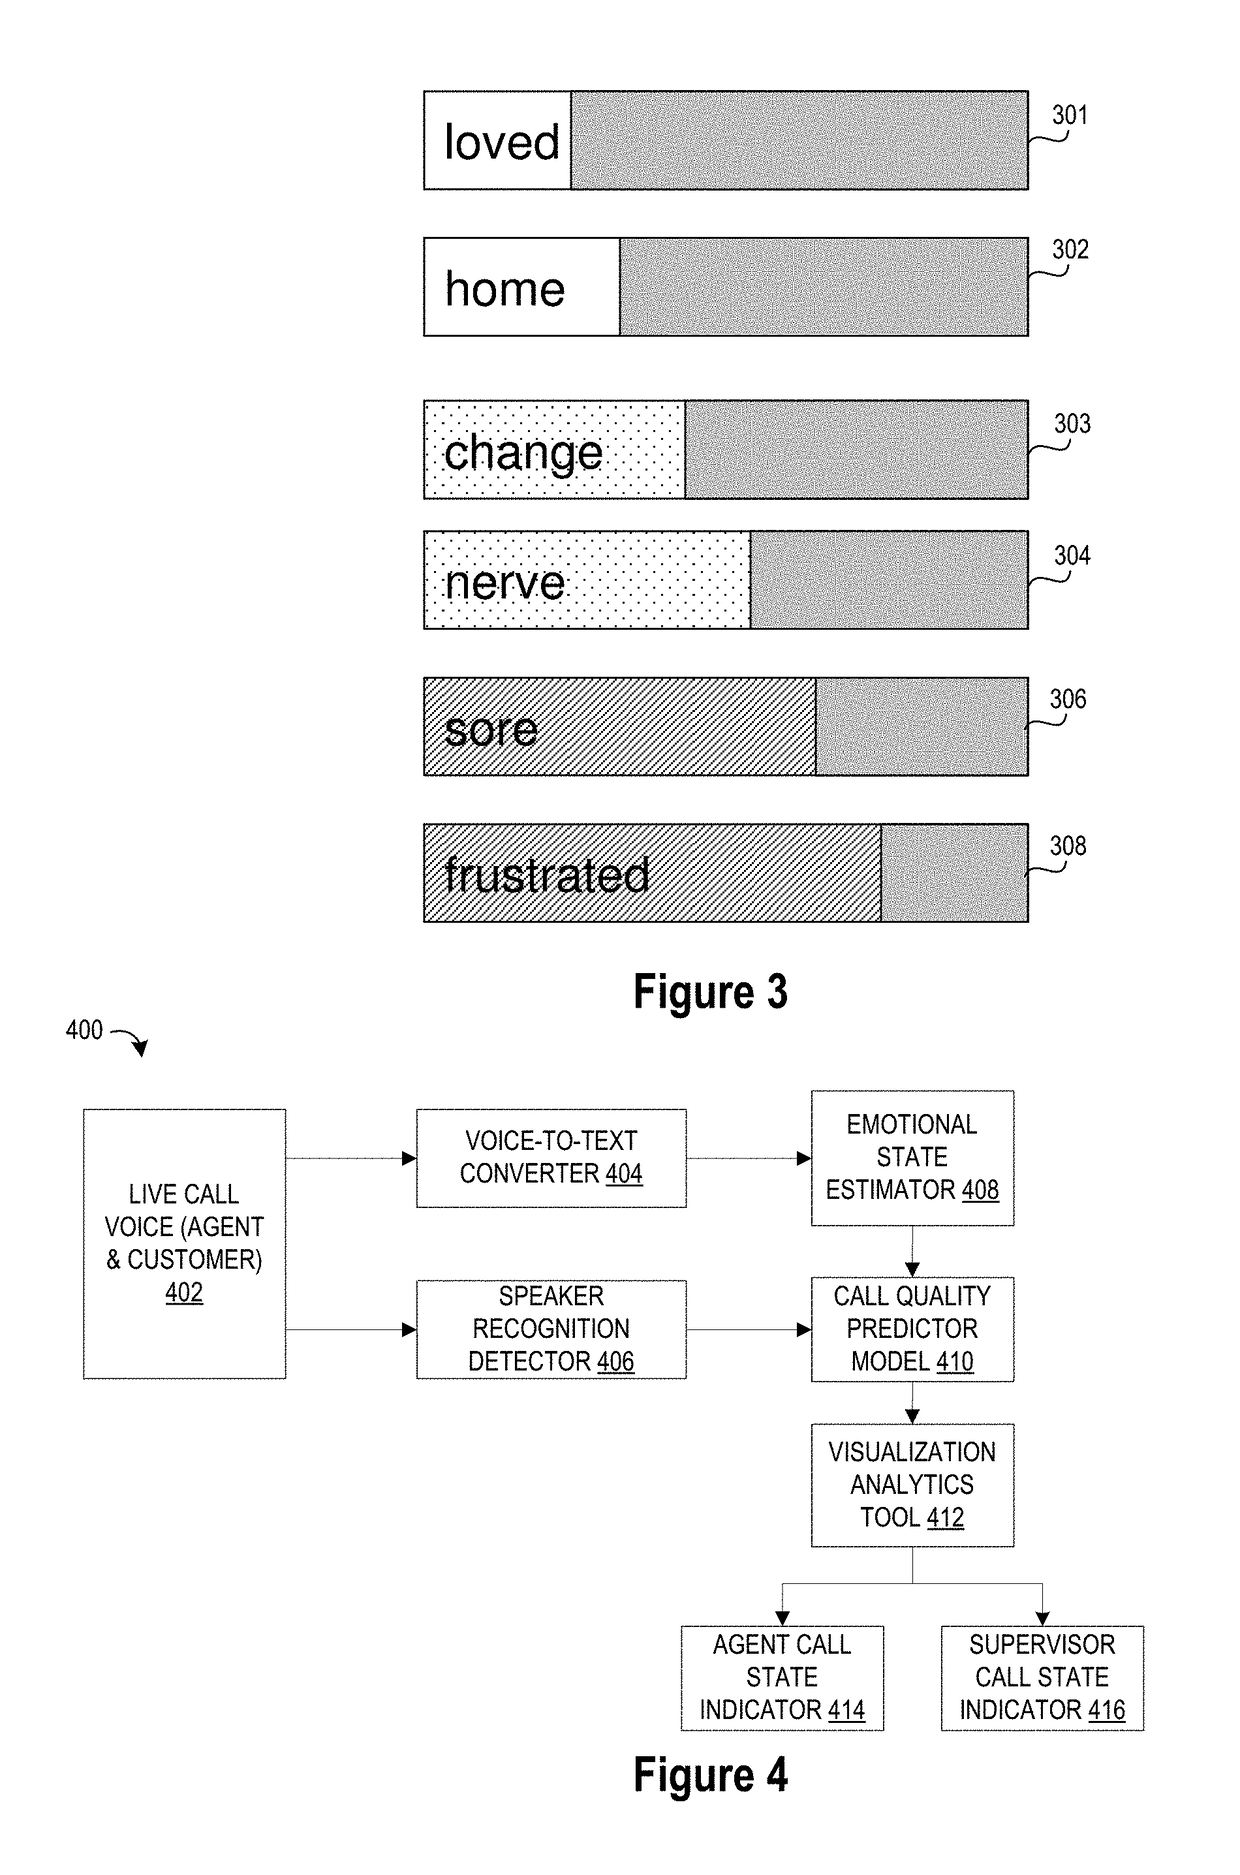 System and method for monitoring and visualizing emotions in call center dialogs at call centers